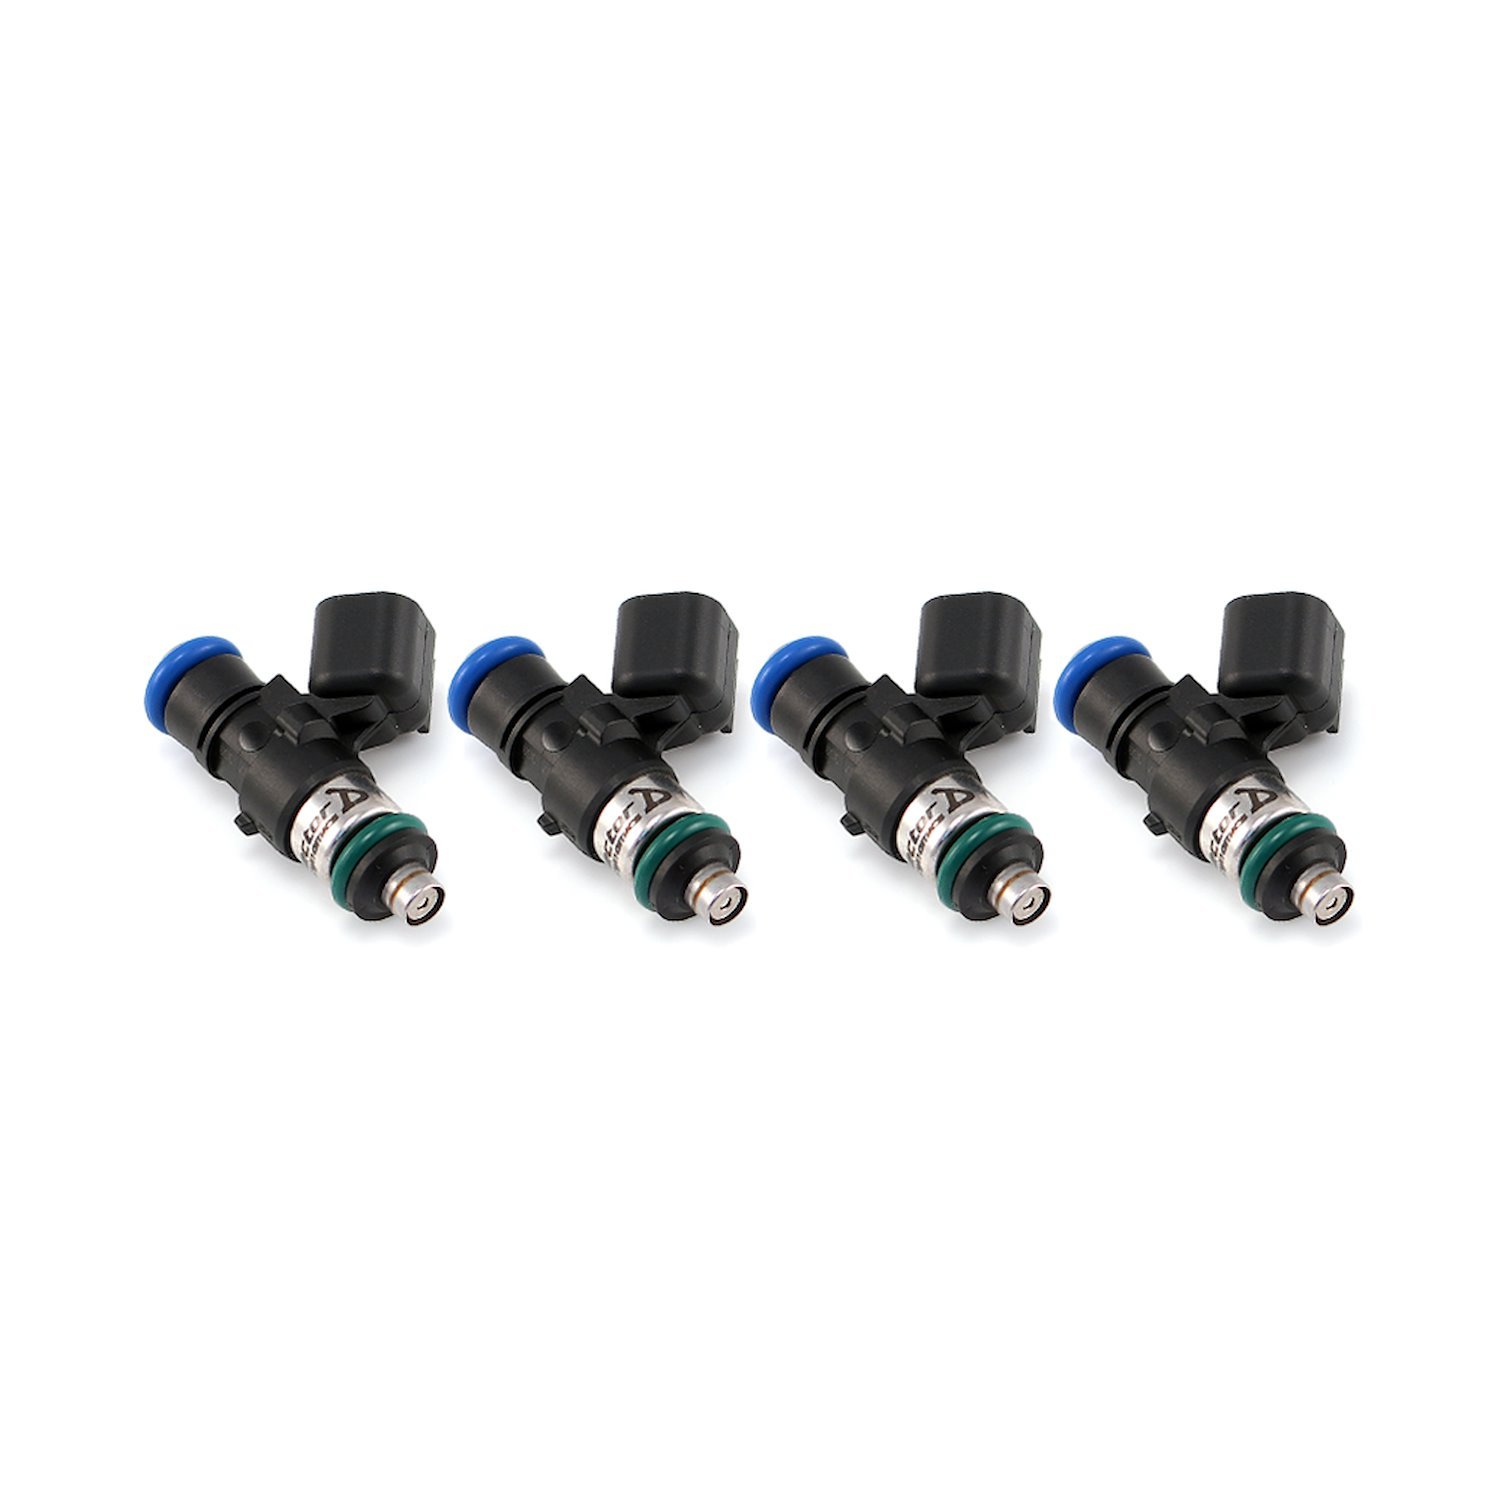 1300.34.14.14.4 1340cc Fuel Injector Set, 34 mm Length, No Adaptor Top, 14 mm Up O-Ring / 14 mm Low O-Ring